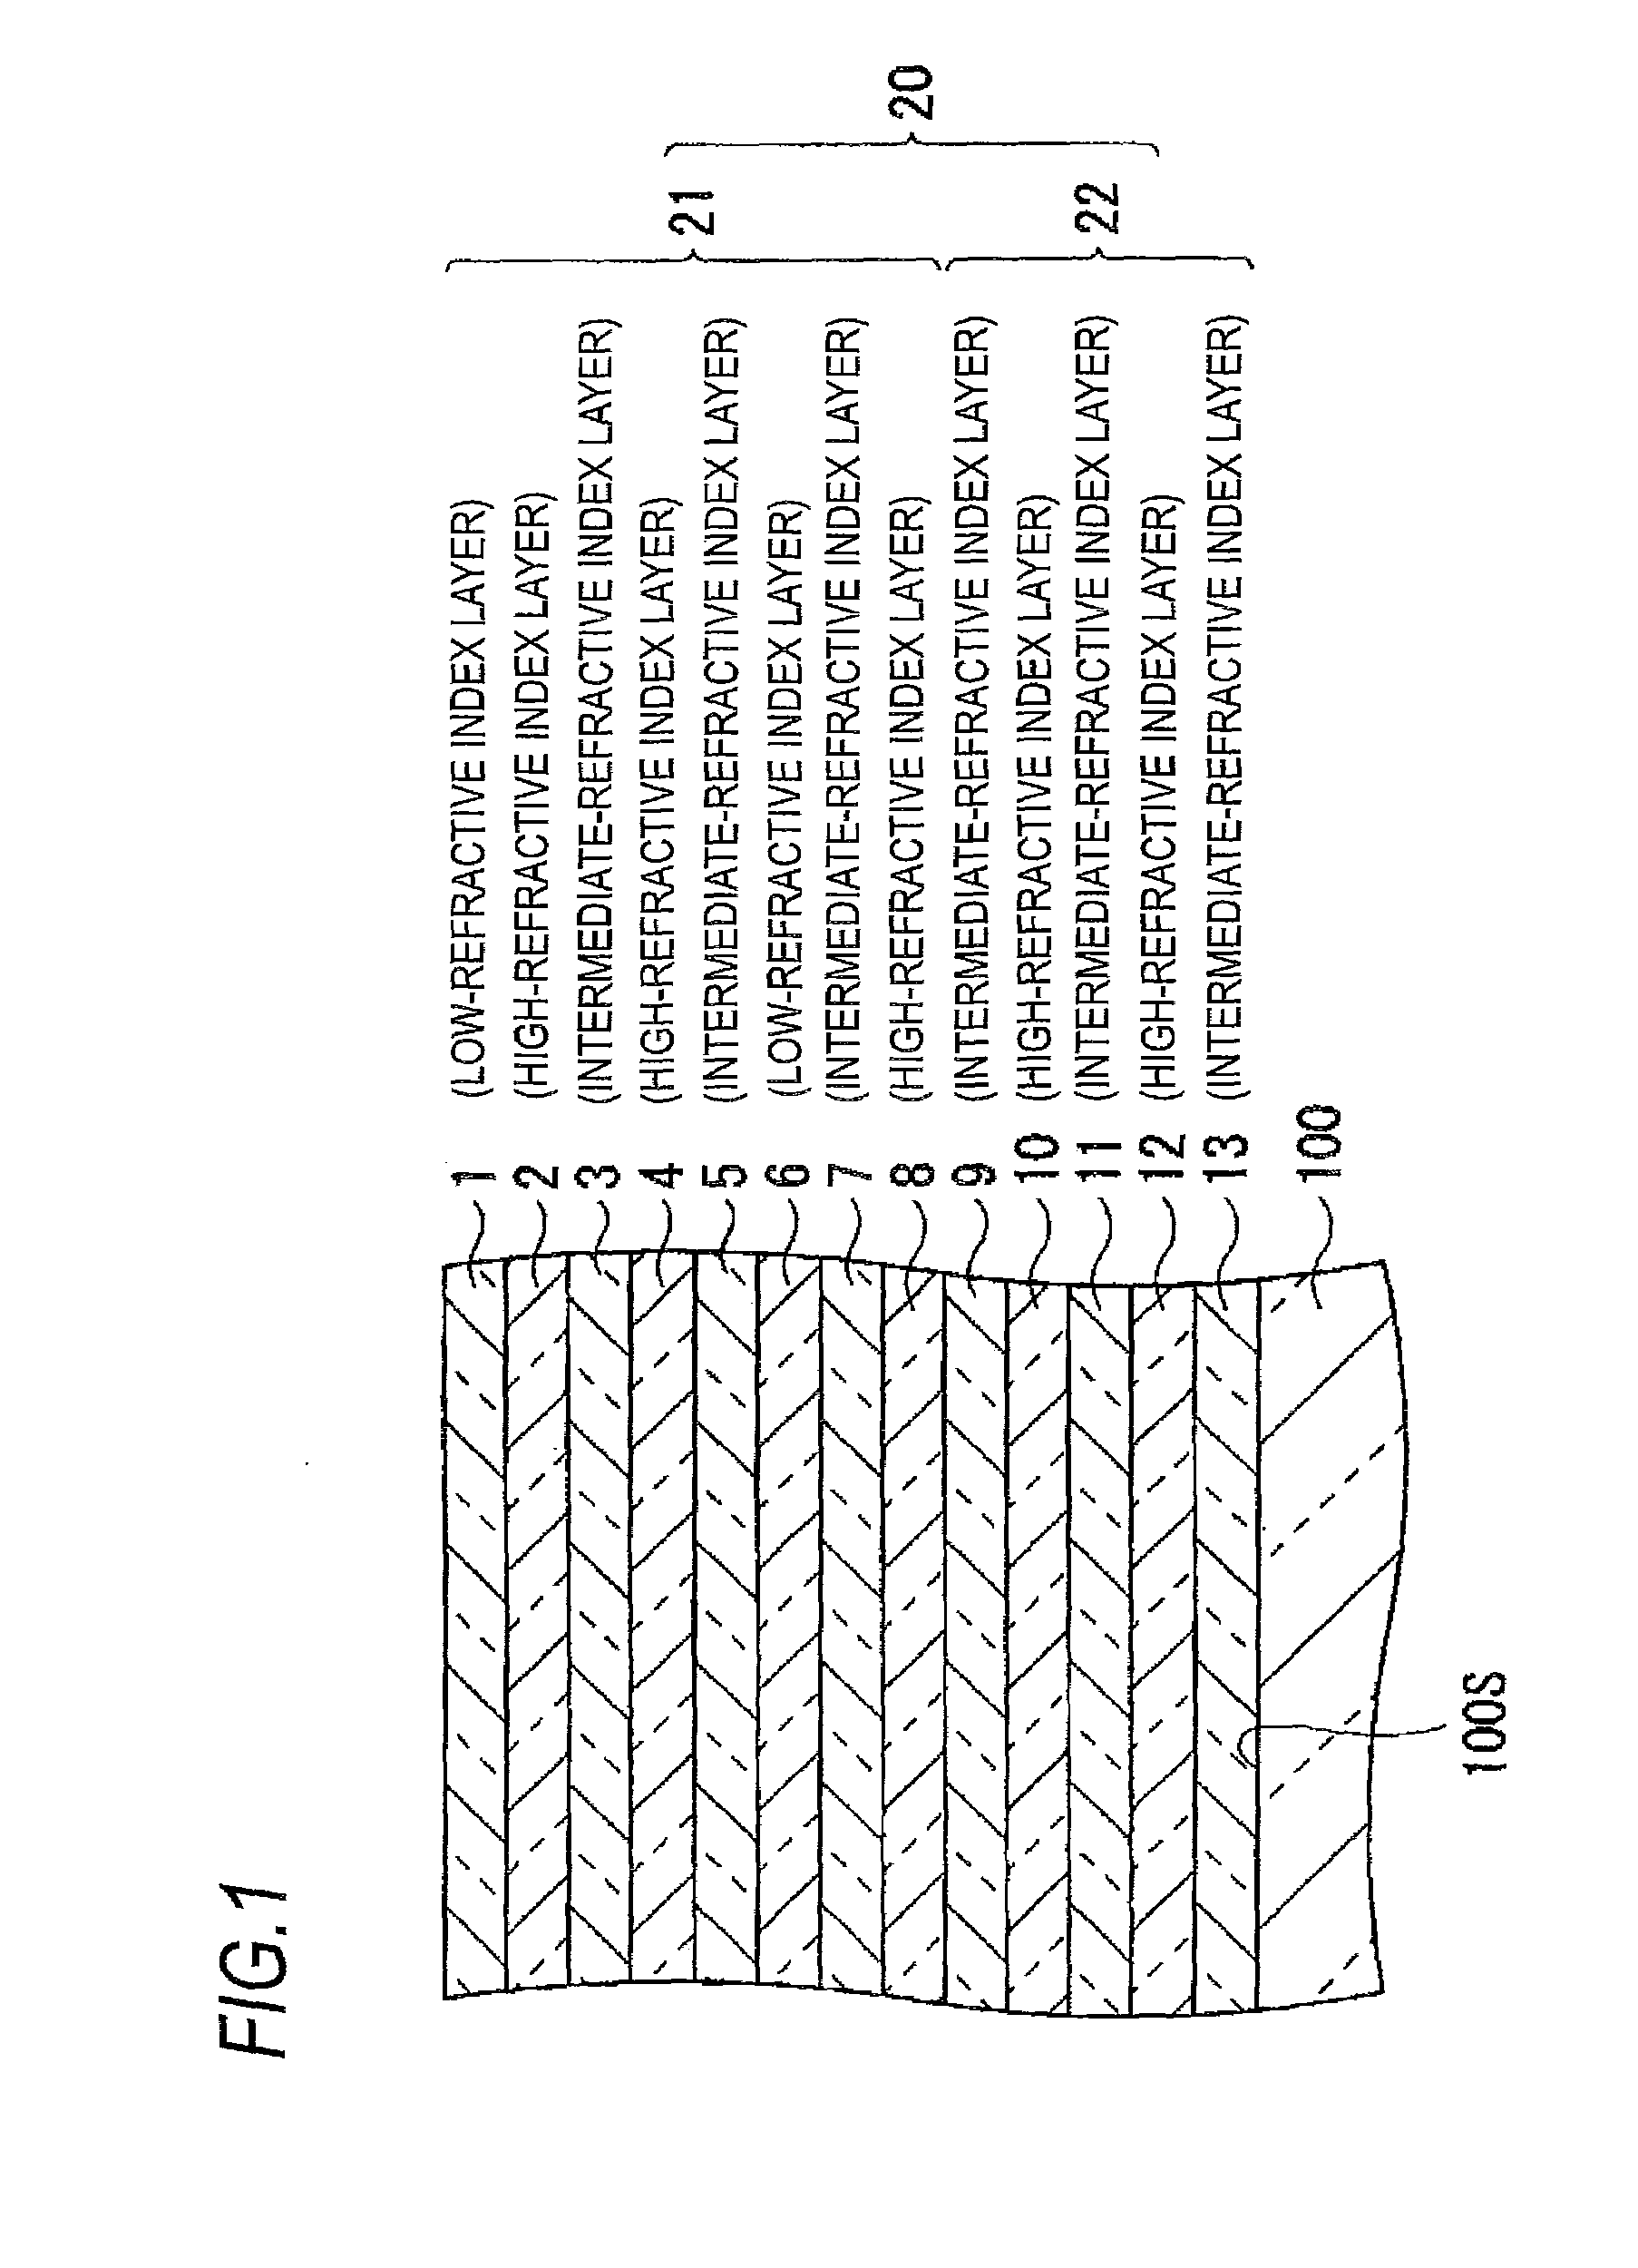 Reflection reducing film, optical member and optical system